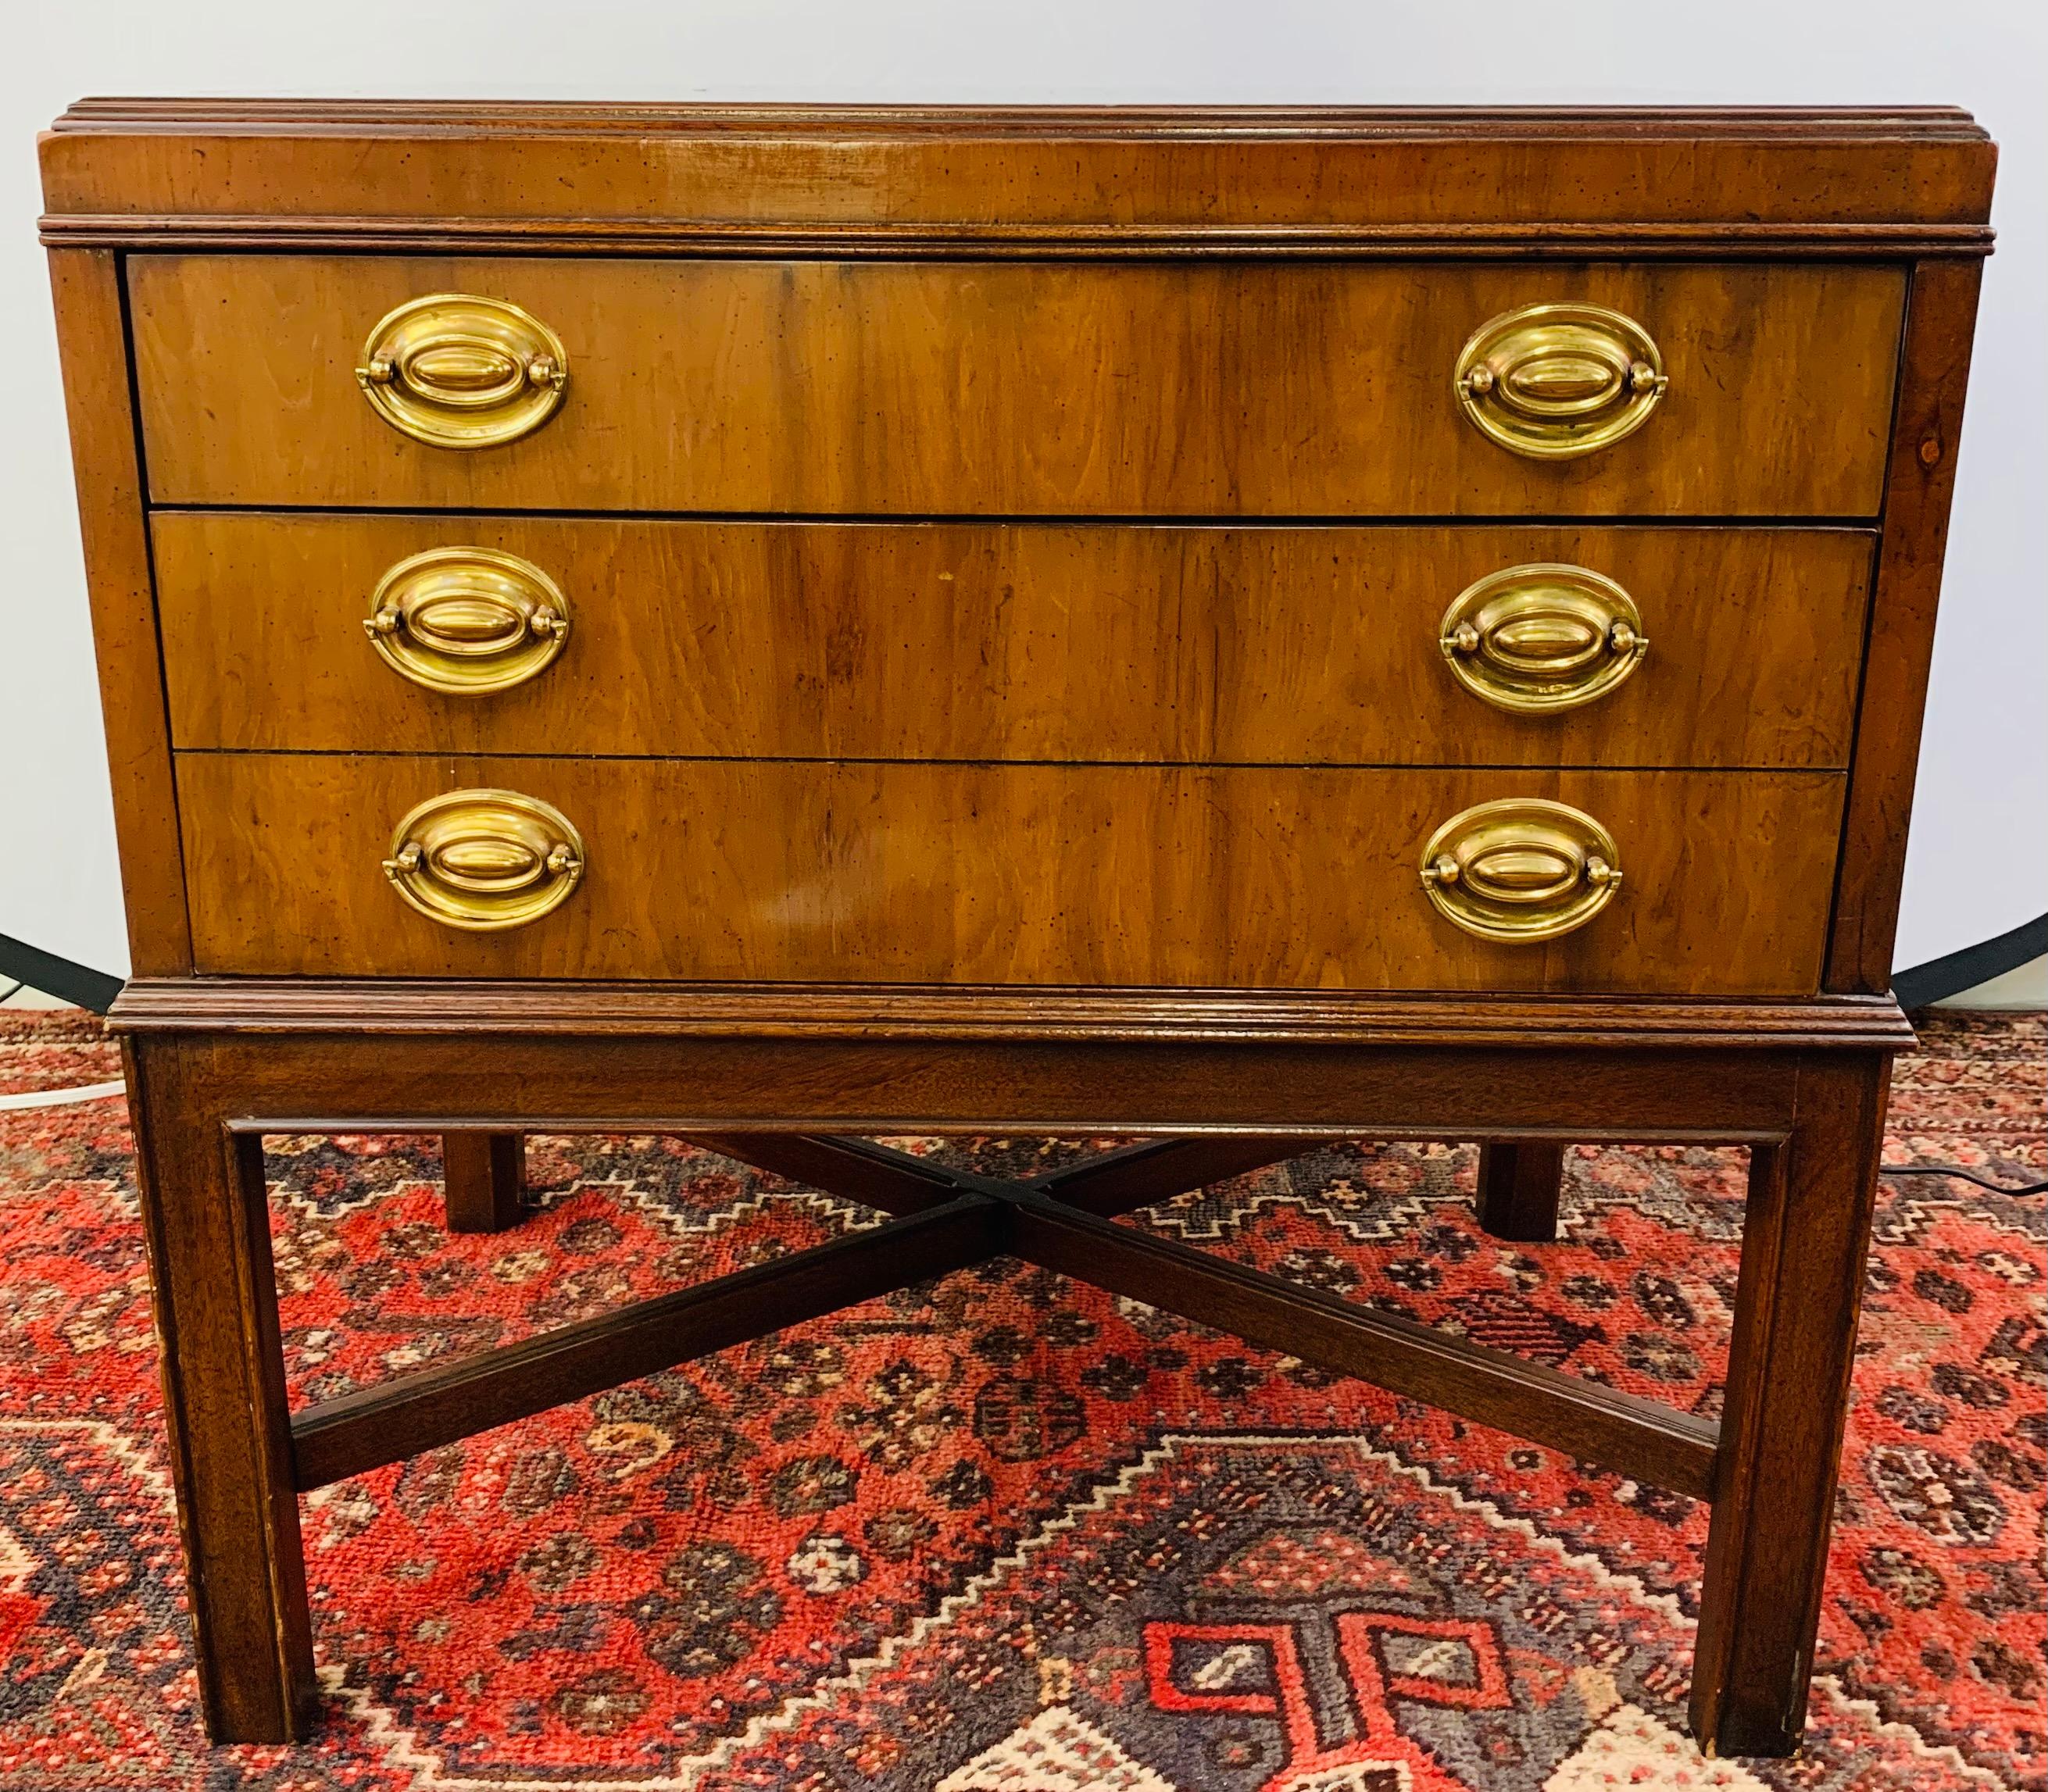 A gorgeous Mid-Century Modern chest, end table or single nightstand by the leading American furniture designer Heritage. The chest is finely crafted in veneered rich walnut burl wood showing beautiful burl grains on the top surface. The chest